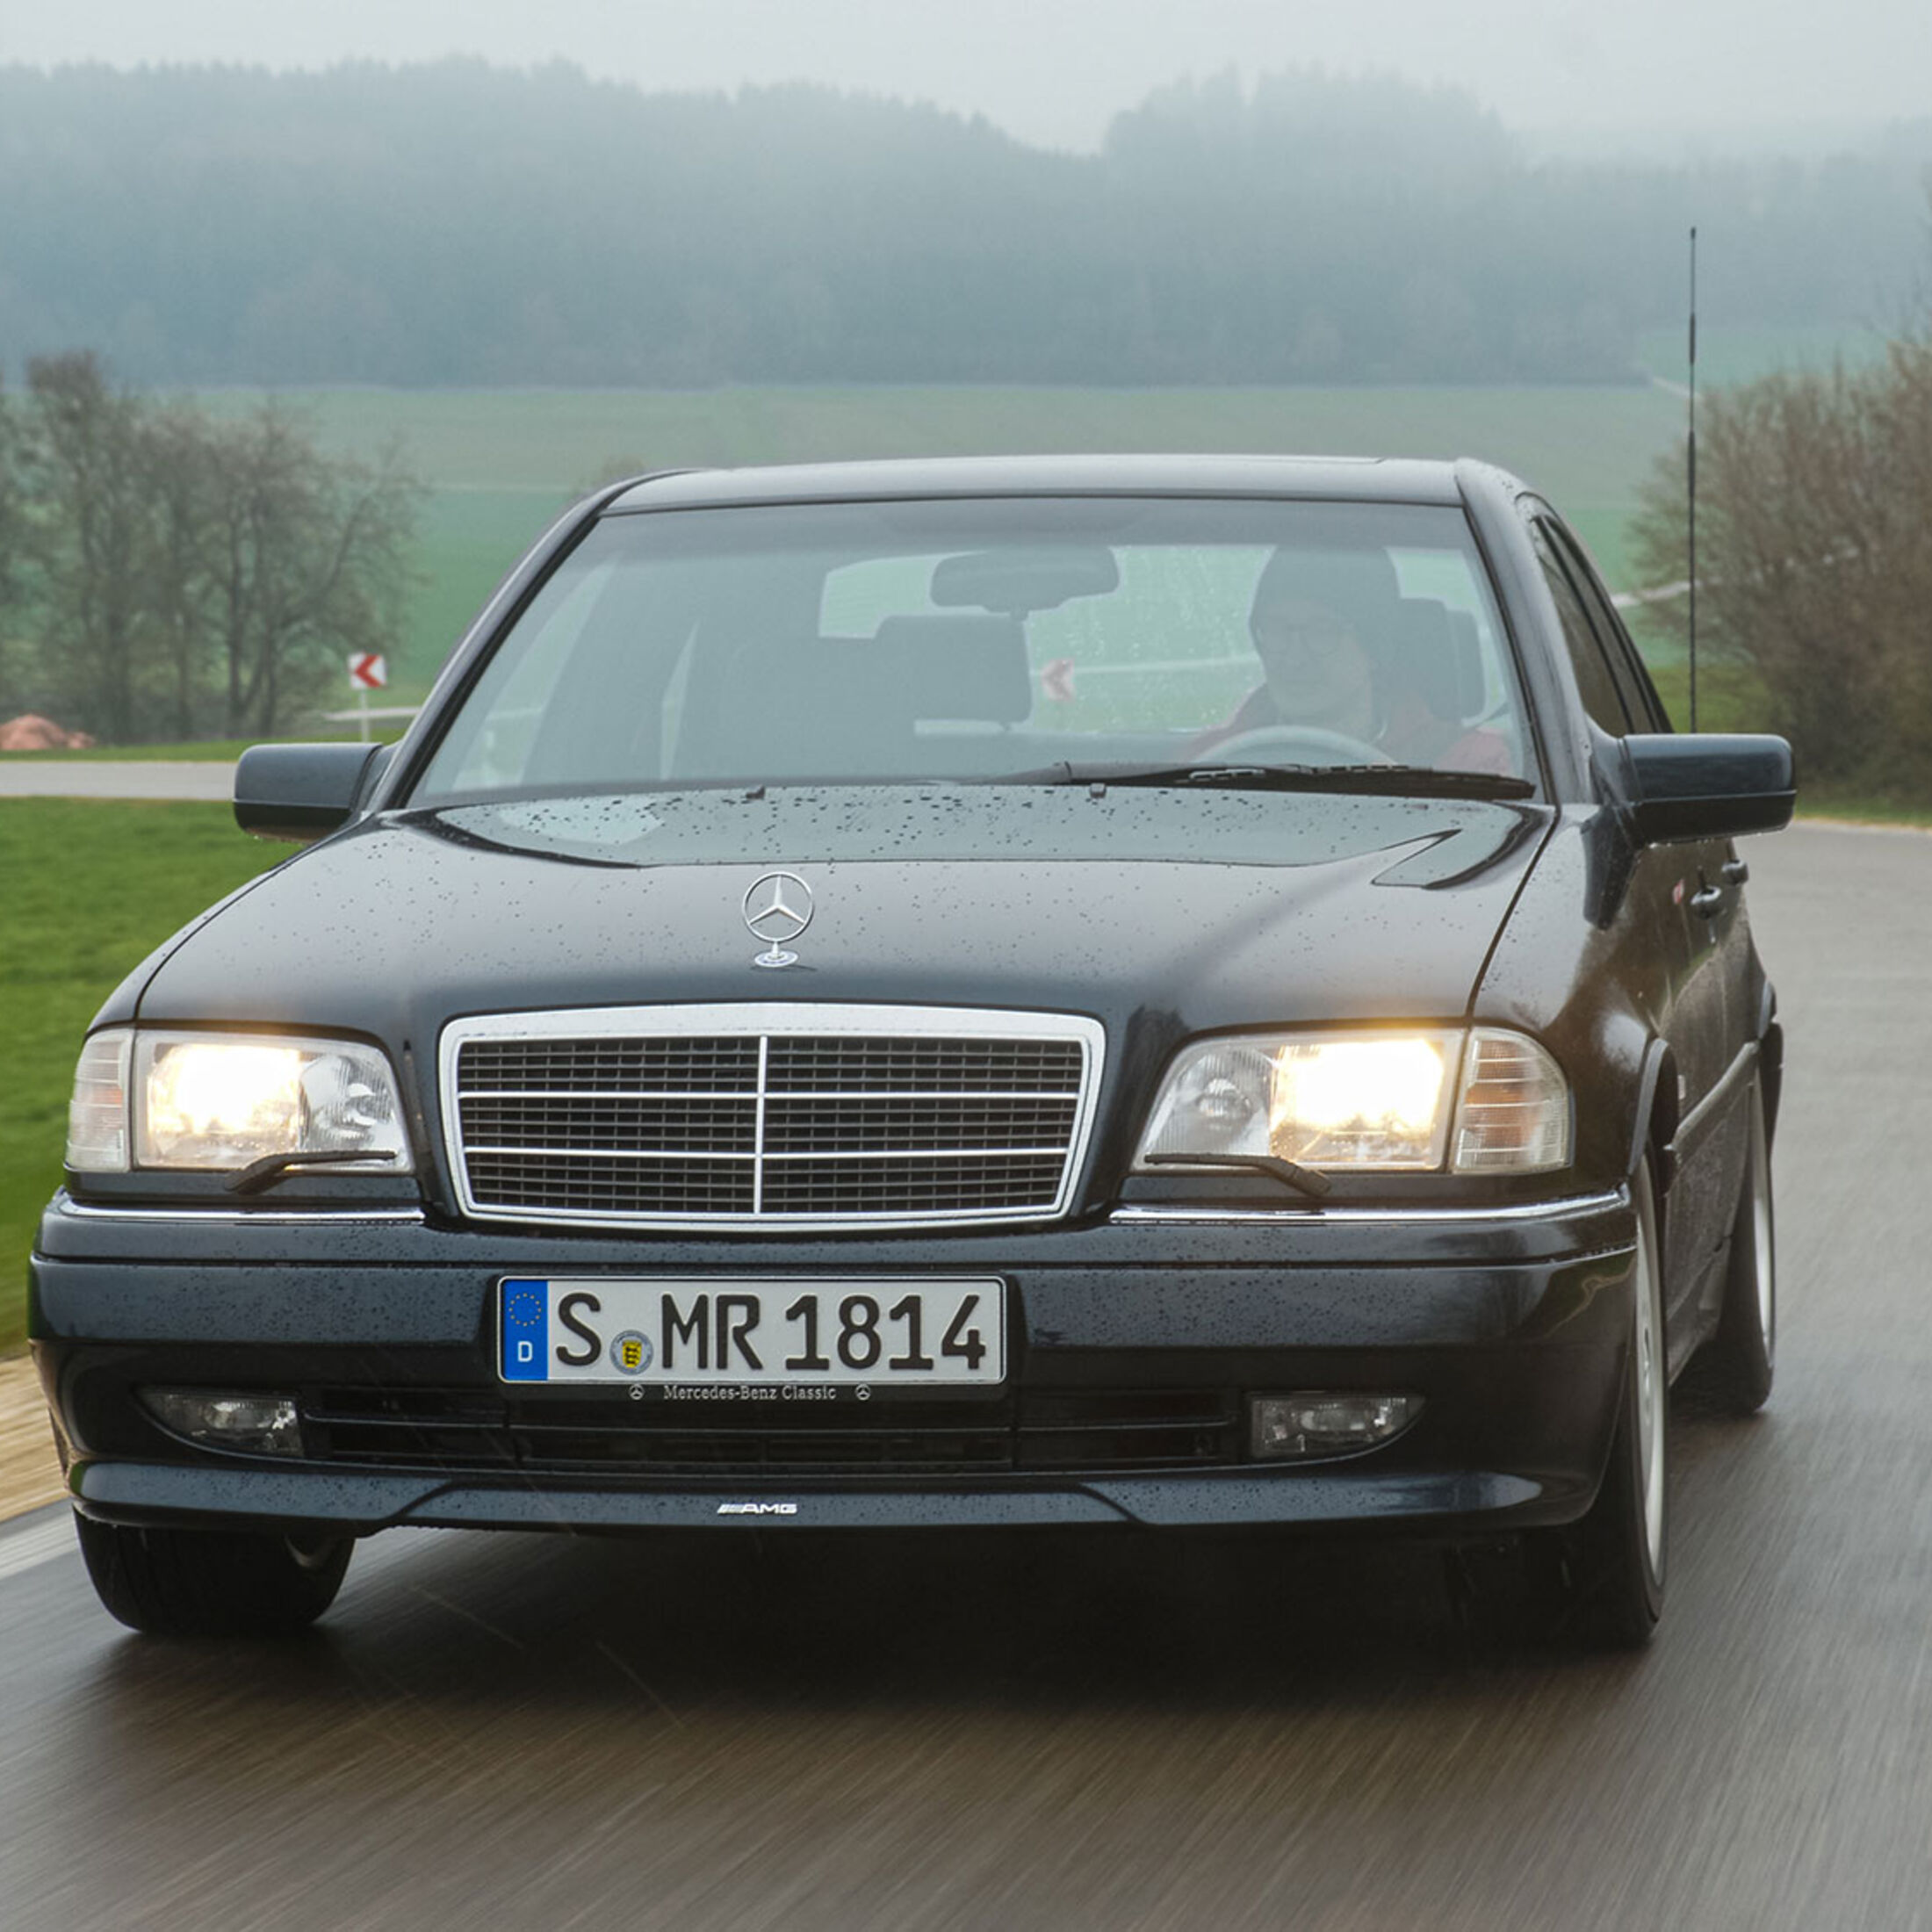 Mercedes Benz C Class W202 & S202 1994 to 2000 common problems